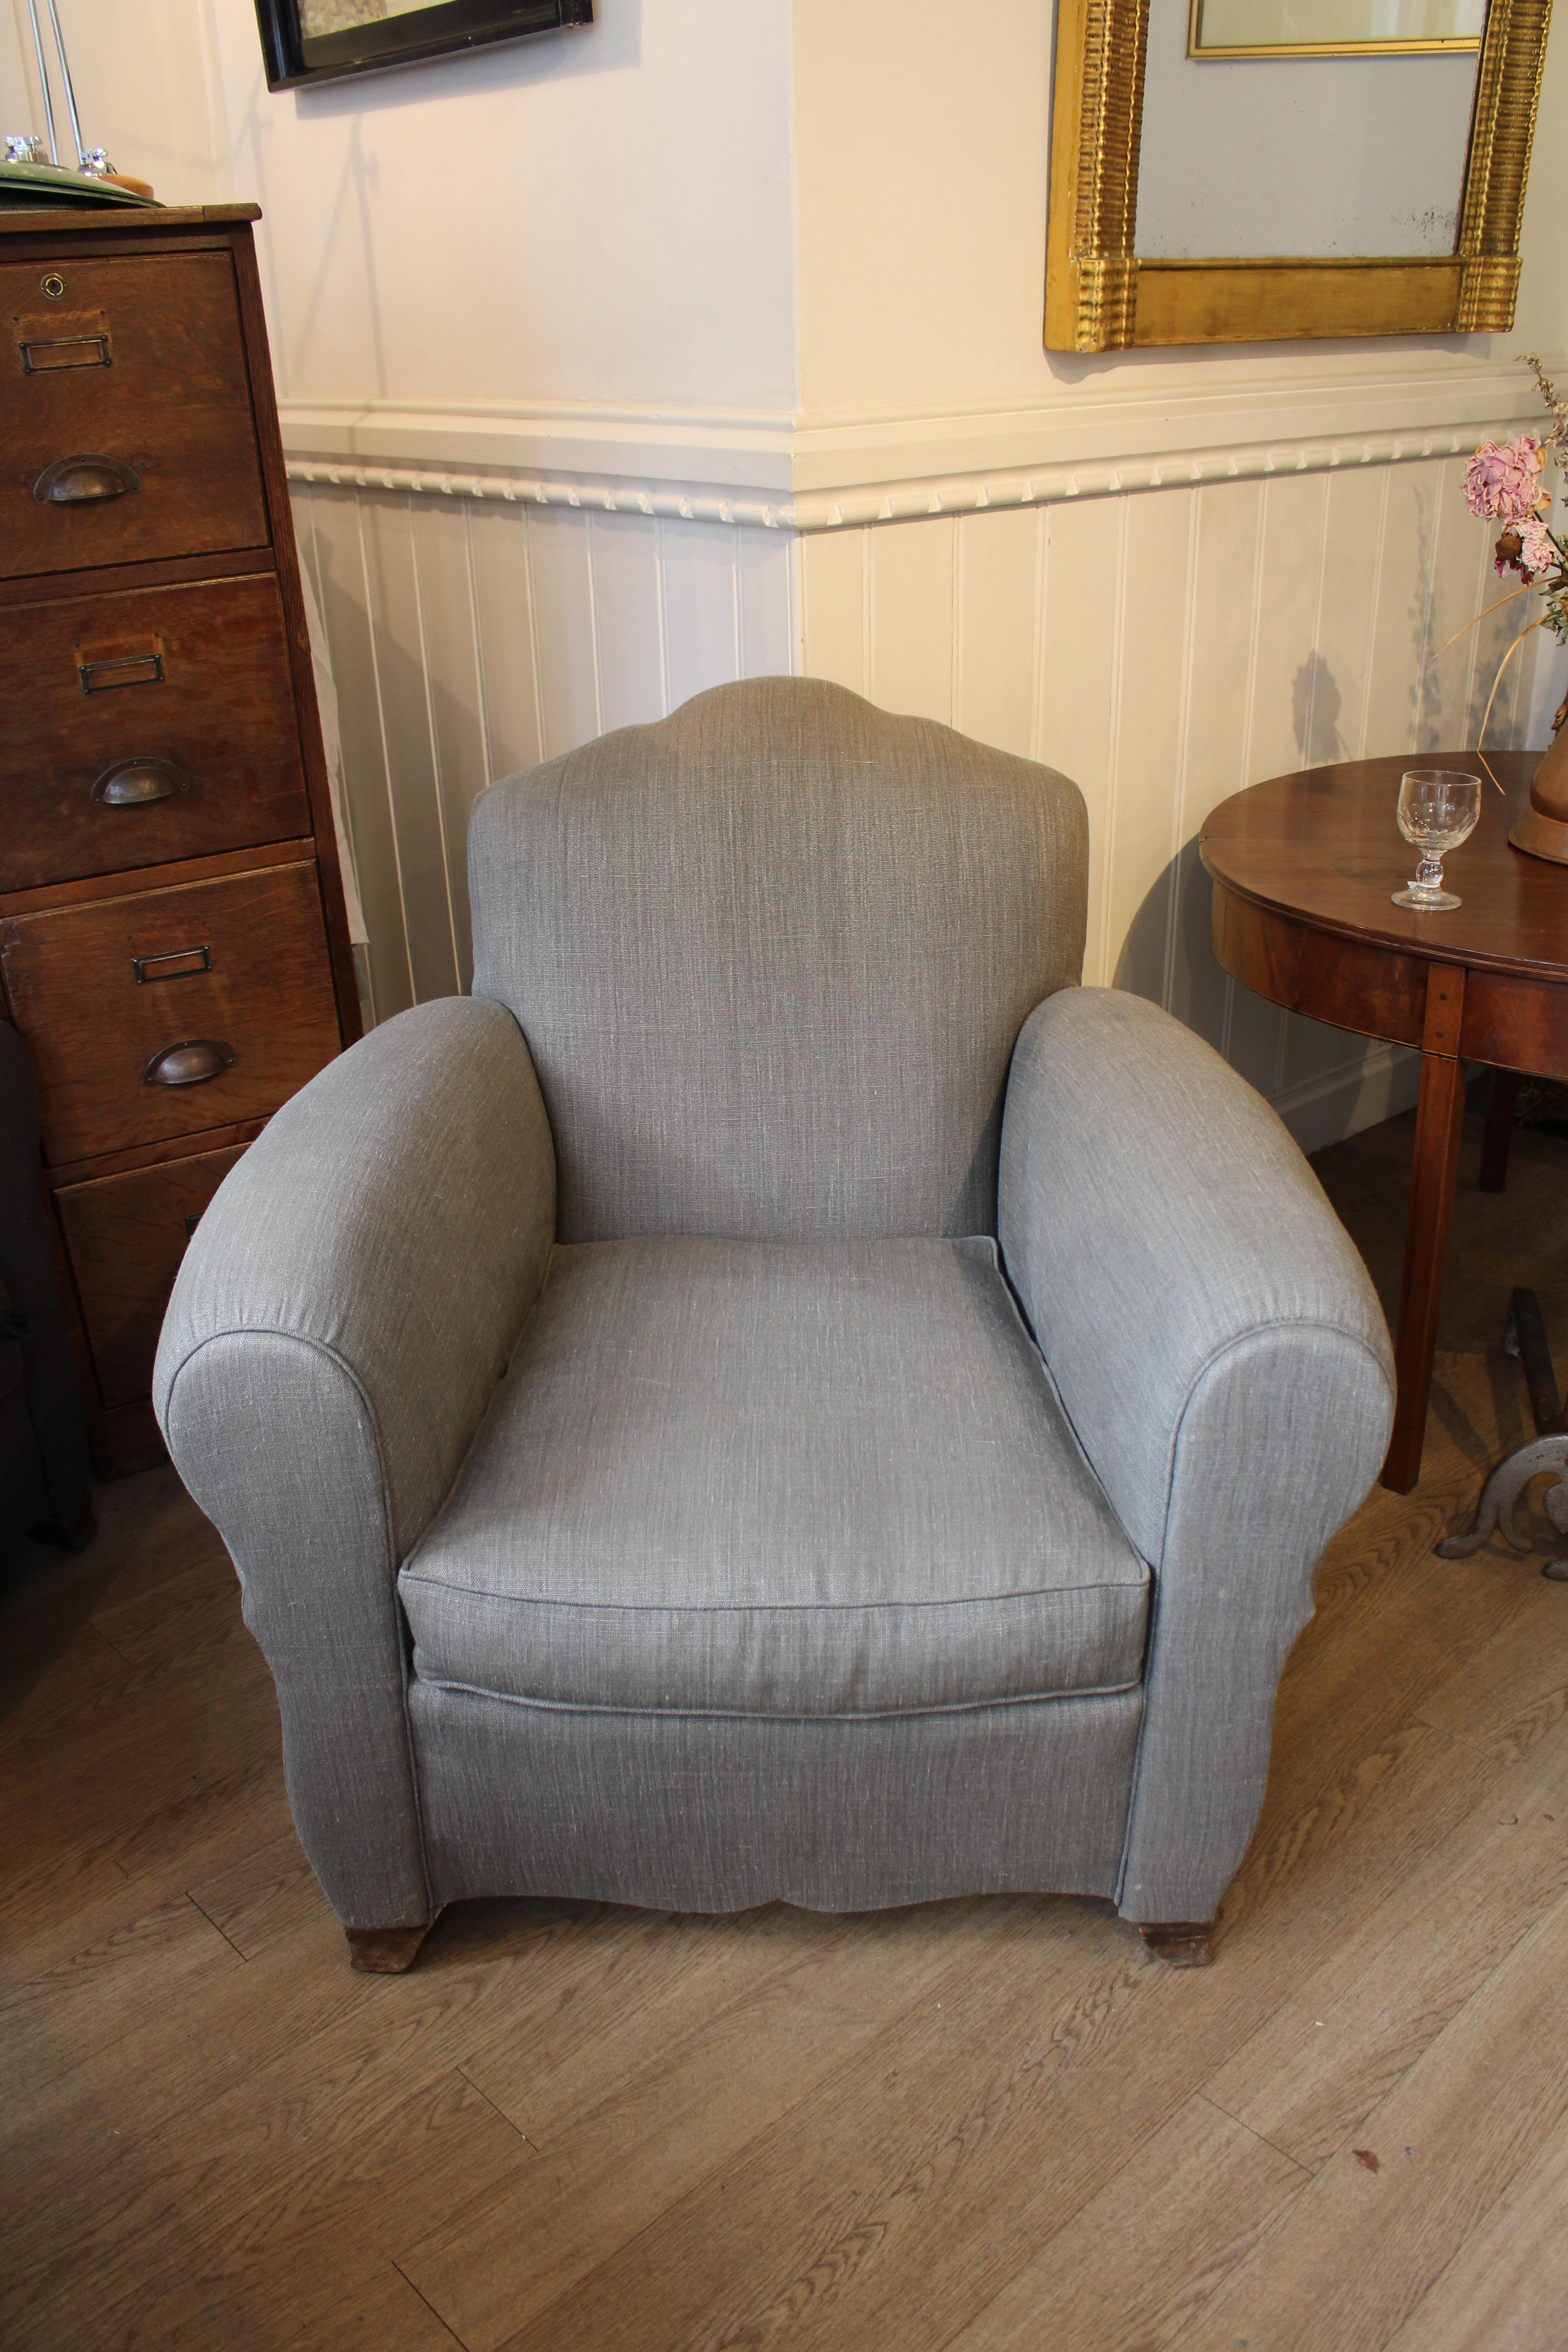 Iconic 1940 French Art Deco Club Chair Armchair Re-Upholstered Grey French Linen For Sale 6